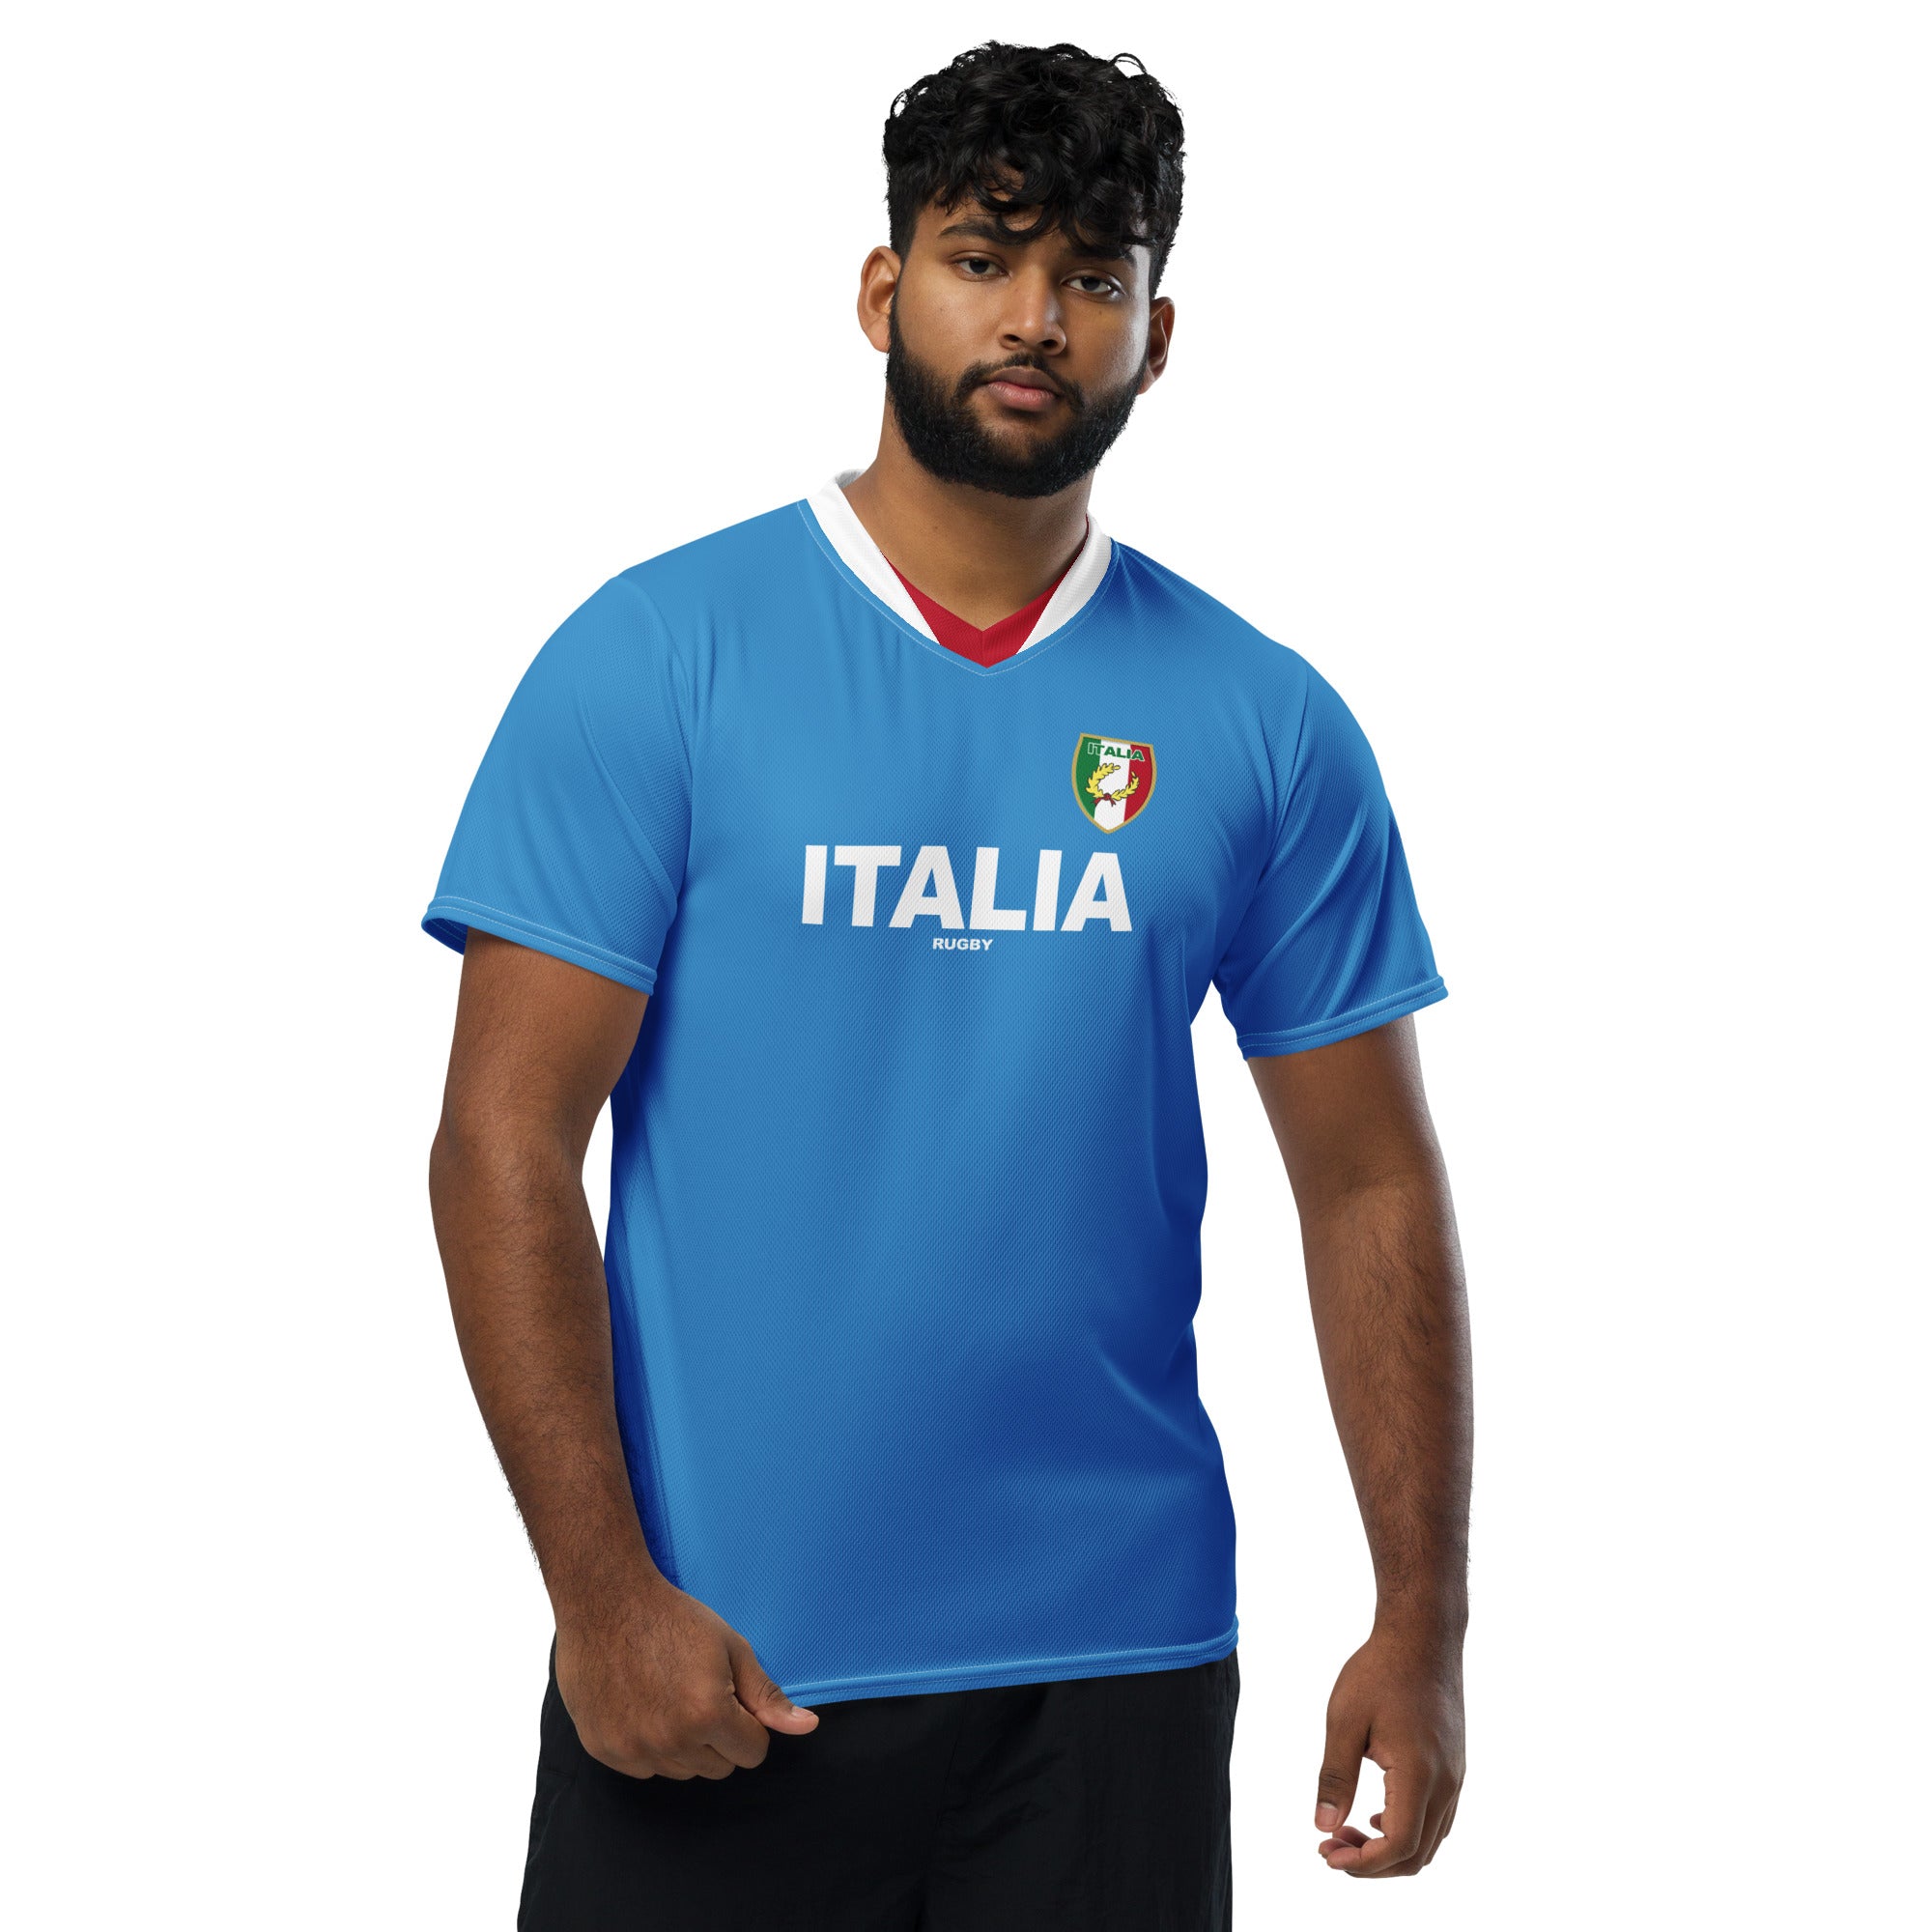 Maillot de Supporter Unisex - Italia Rugby